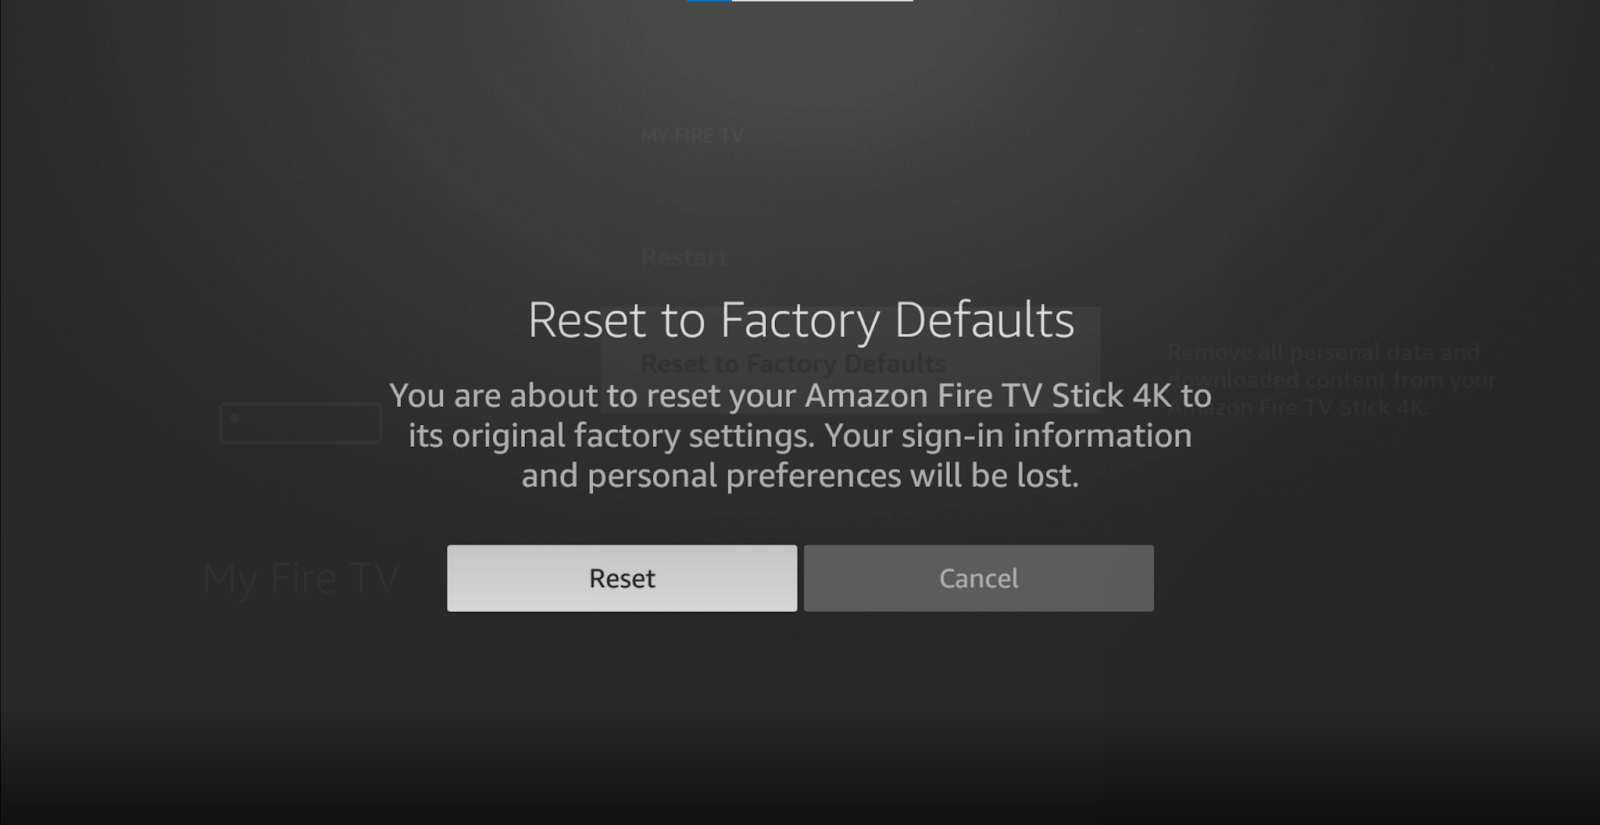 Confirm reset to factory defaults on Amazon Fire Stick